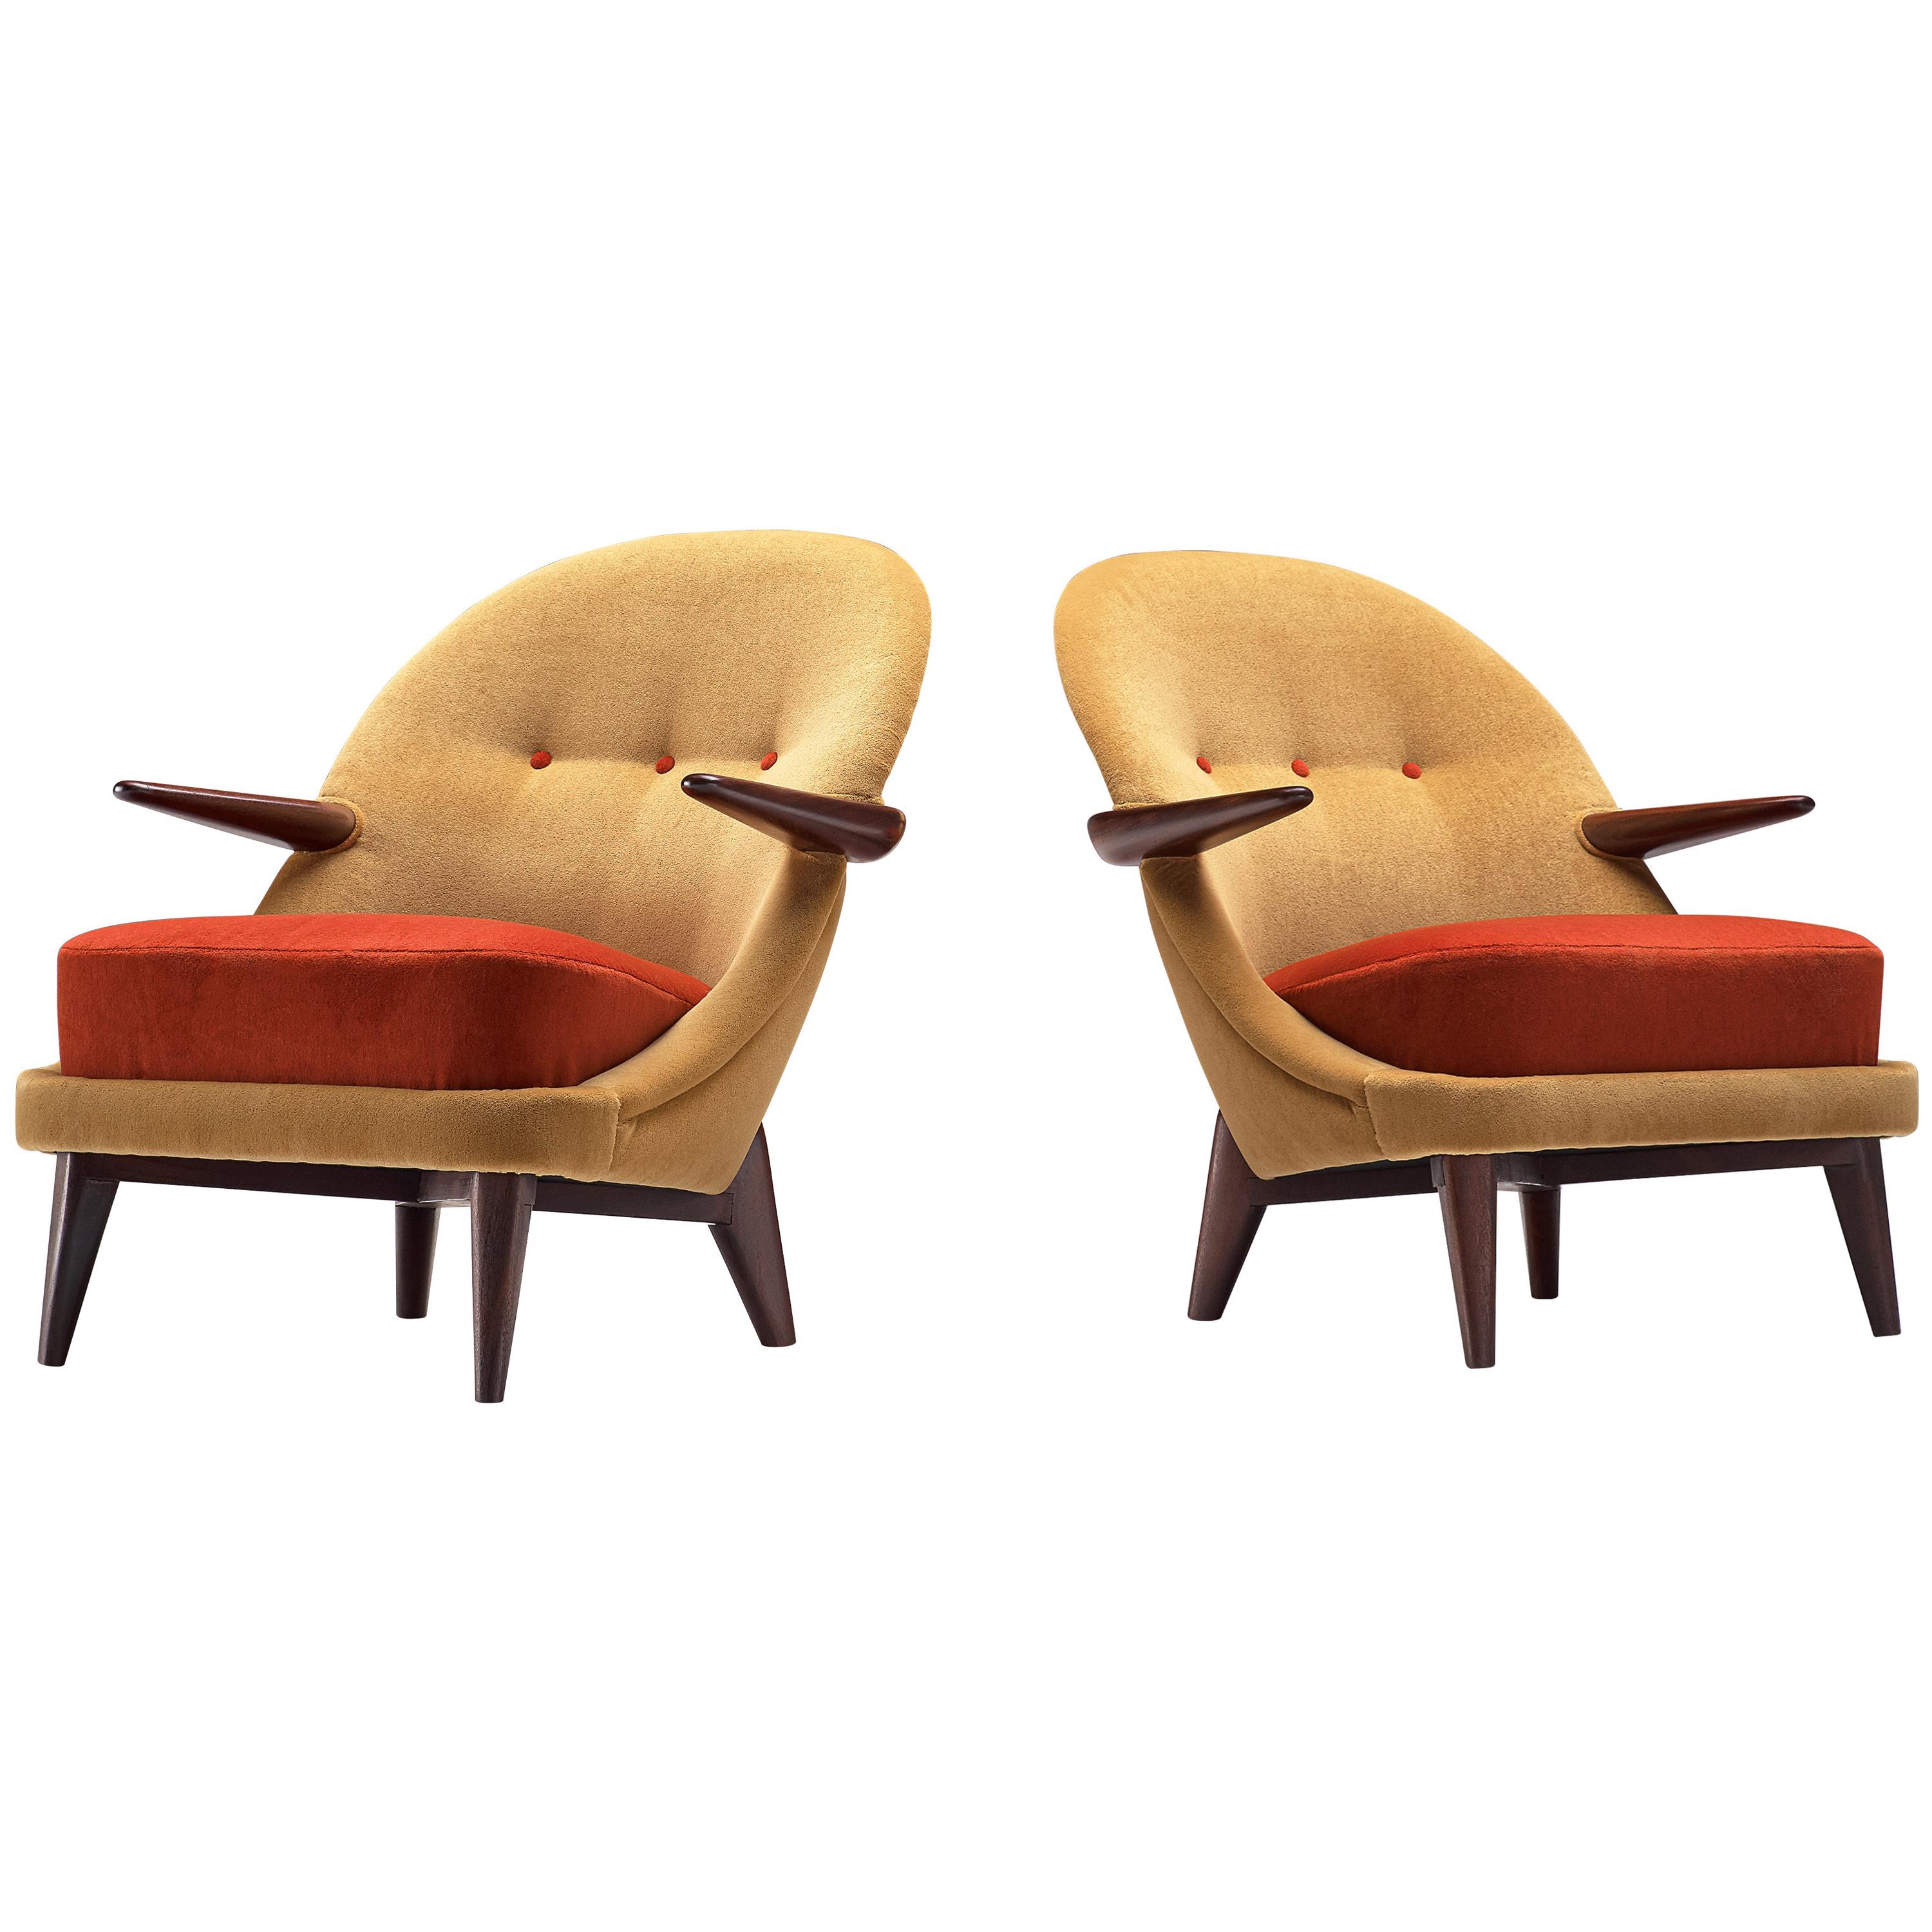 Reupholstered Danish Lounge Chairs in Golden and Red Dedar Fabric